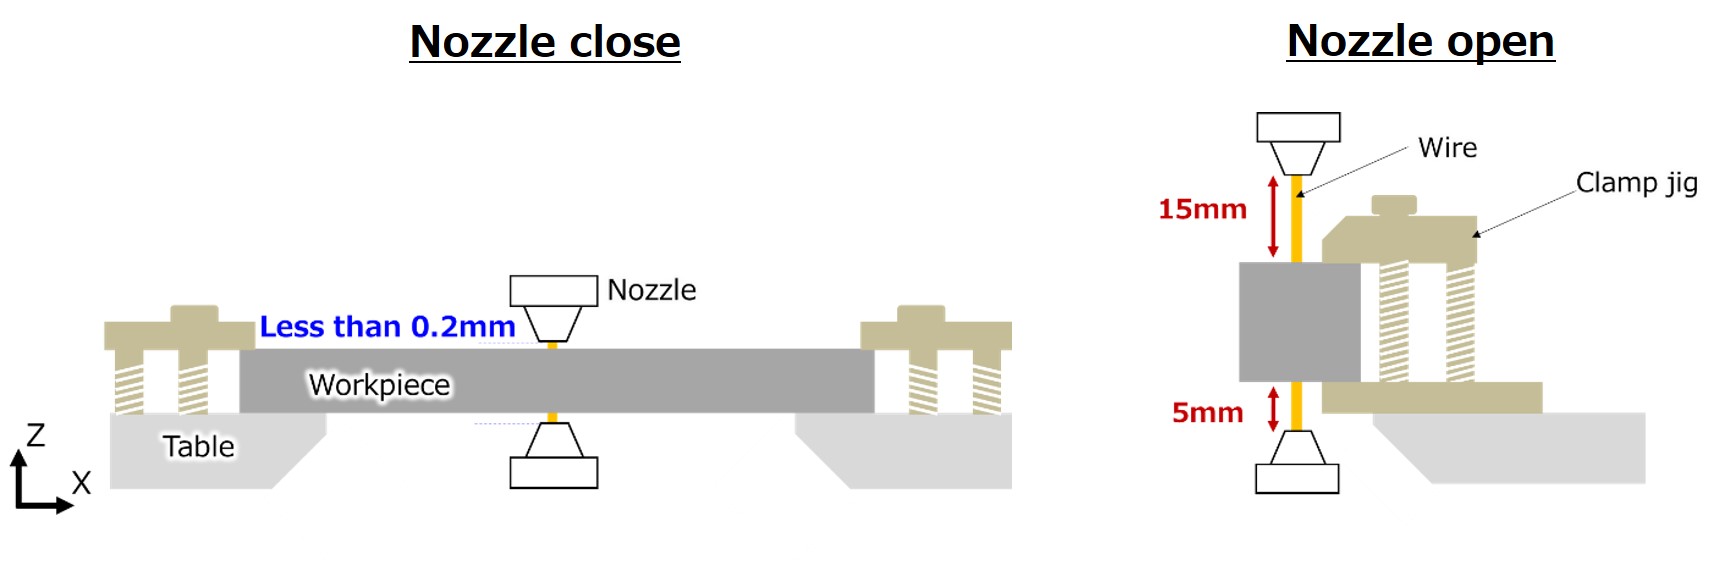 cutting accuracy of nozzle open condition